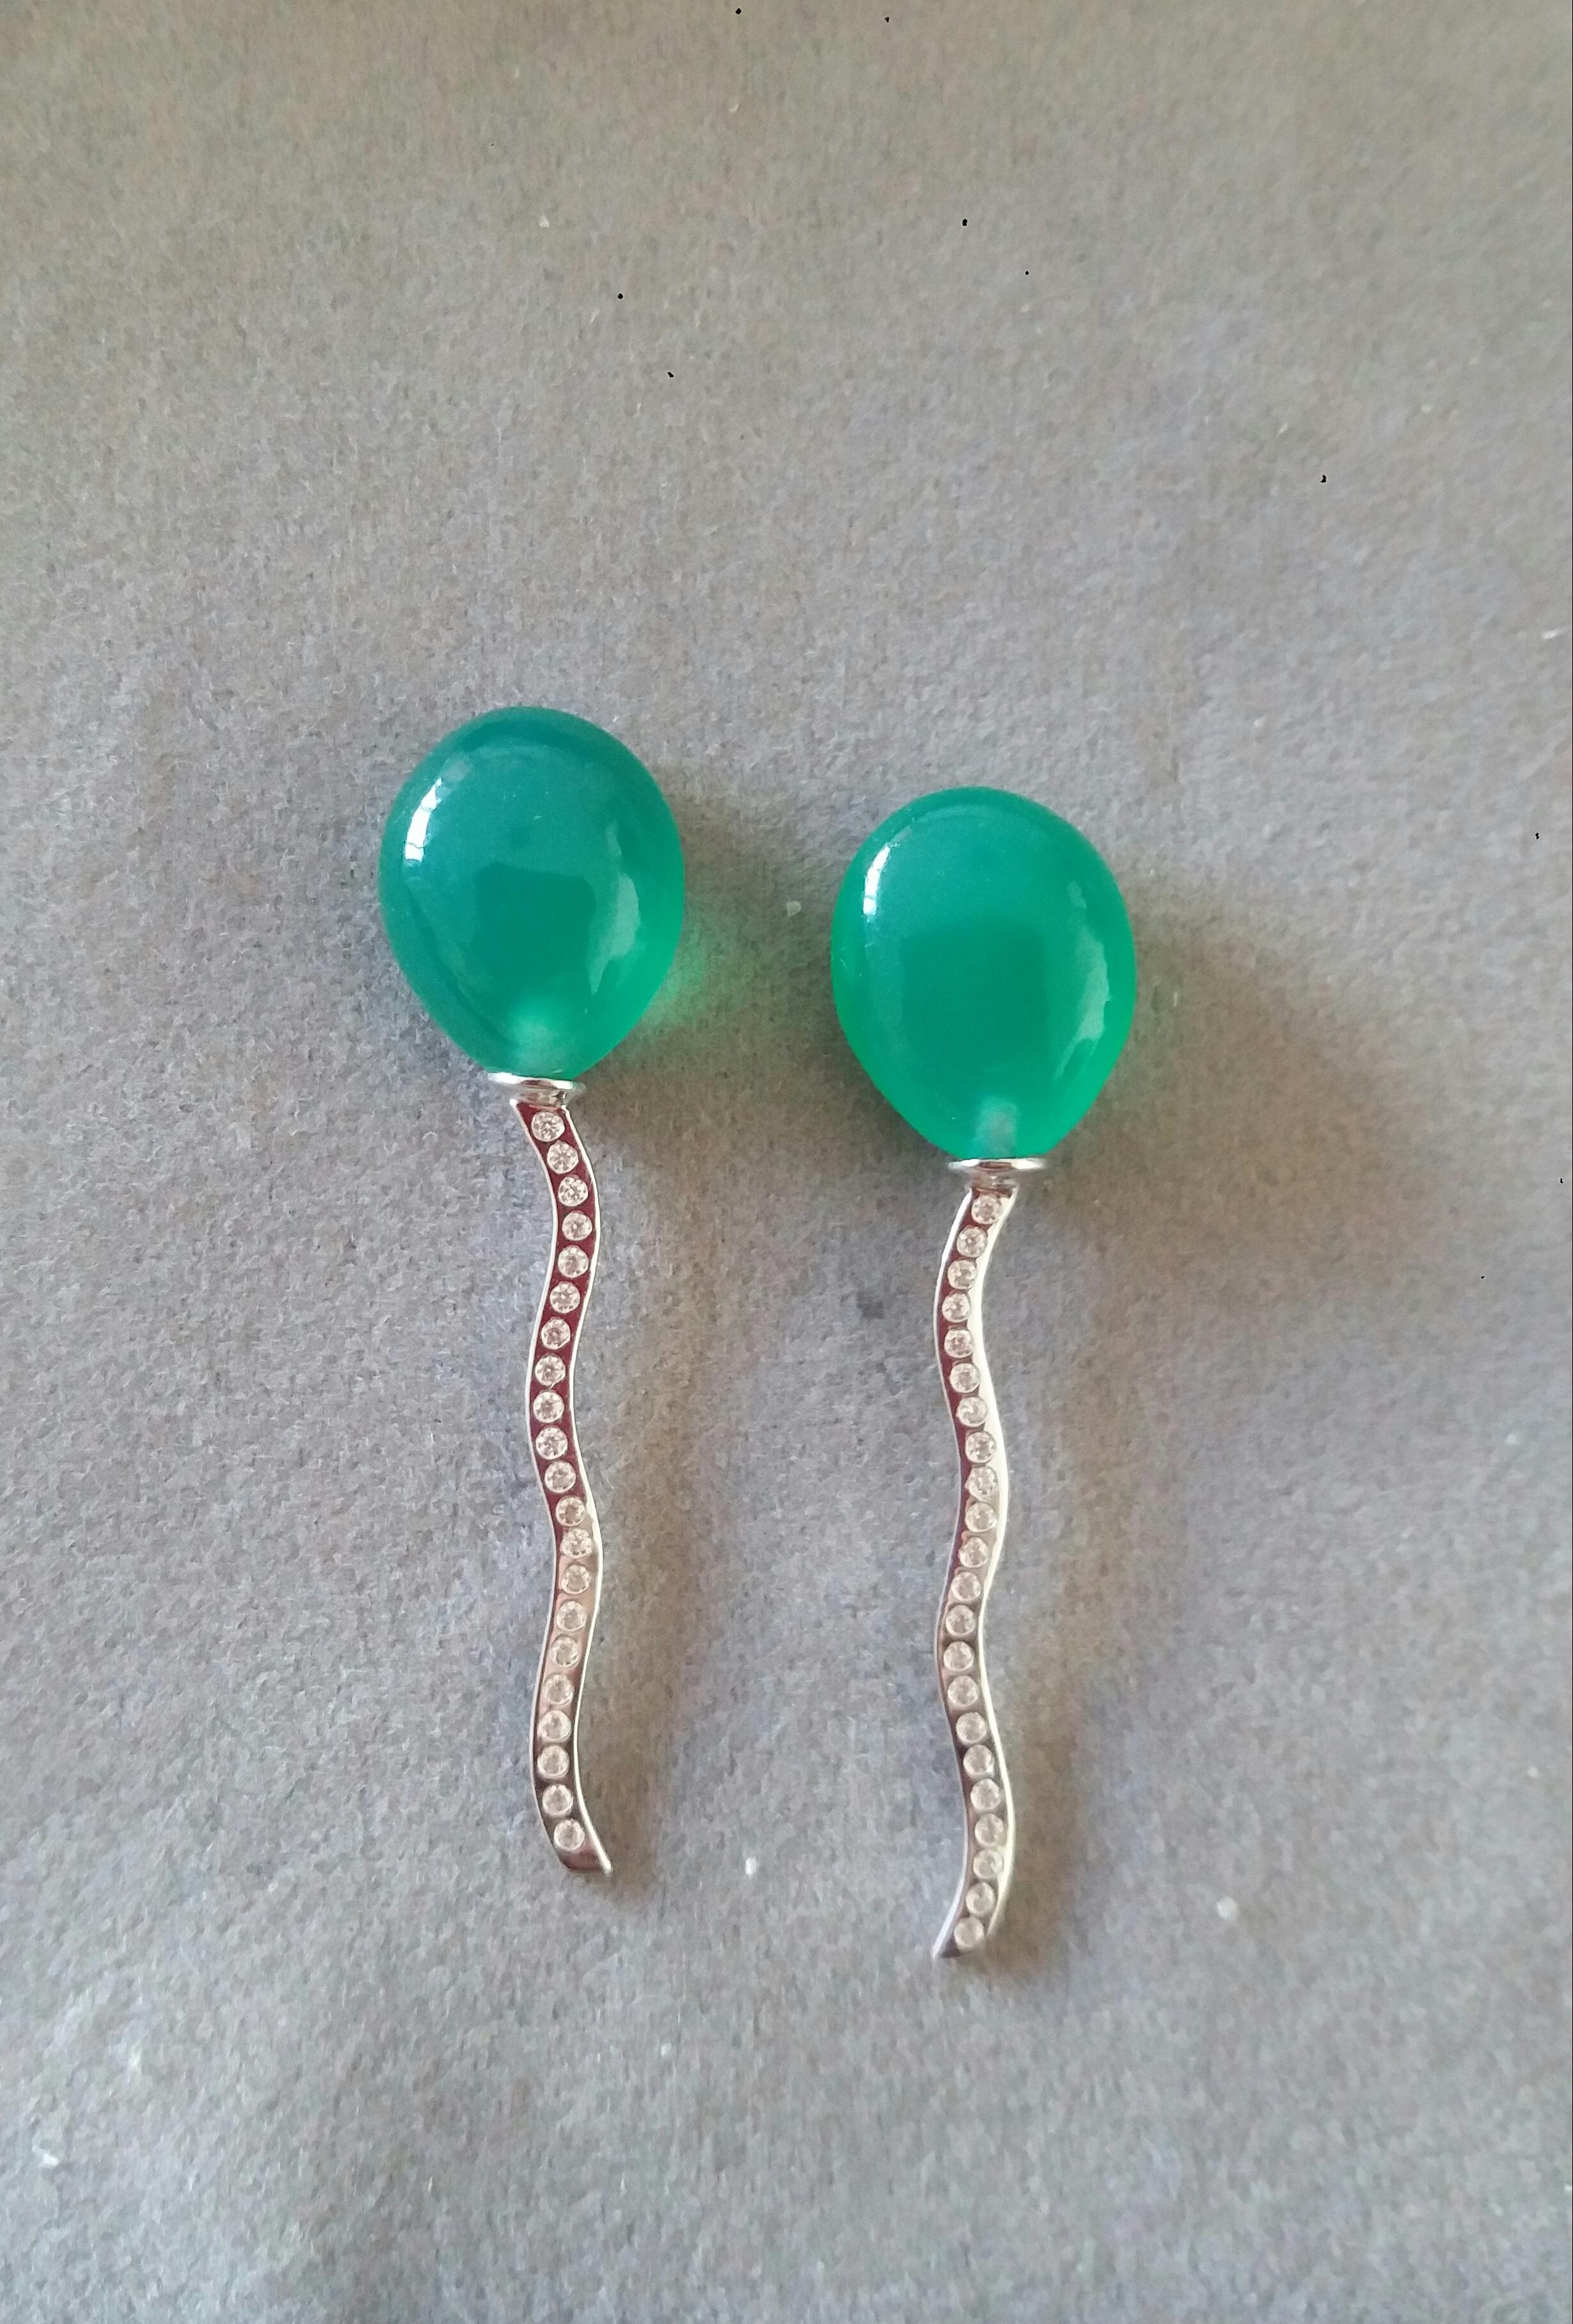 2 pear-shaped Natural Color Green Onyx cabs measuring 11x15 mm.mounted like balloons with the thread holding them made of 14 carat White Gold and 44 small diamonds.

In 1978 our workshop started in Italy to make simple-chic Art Deco style jewellery,